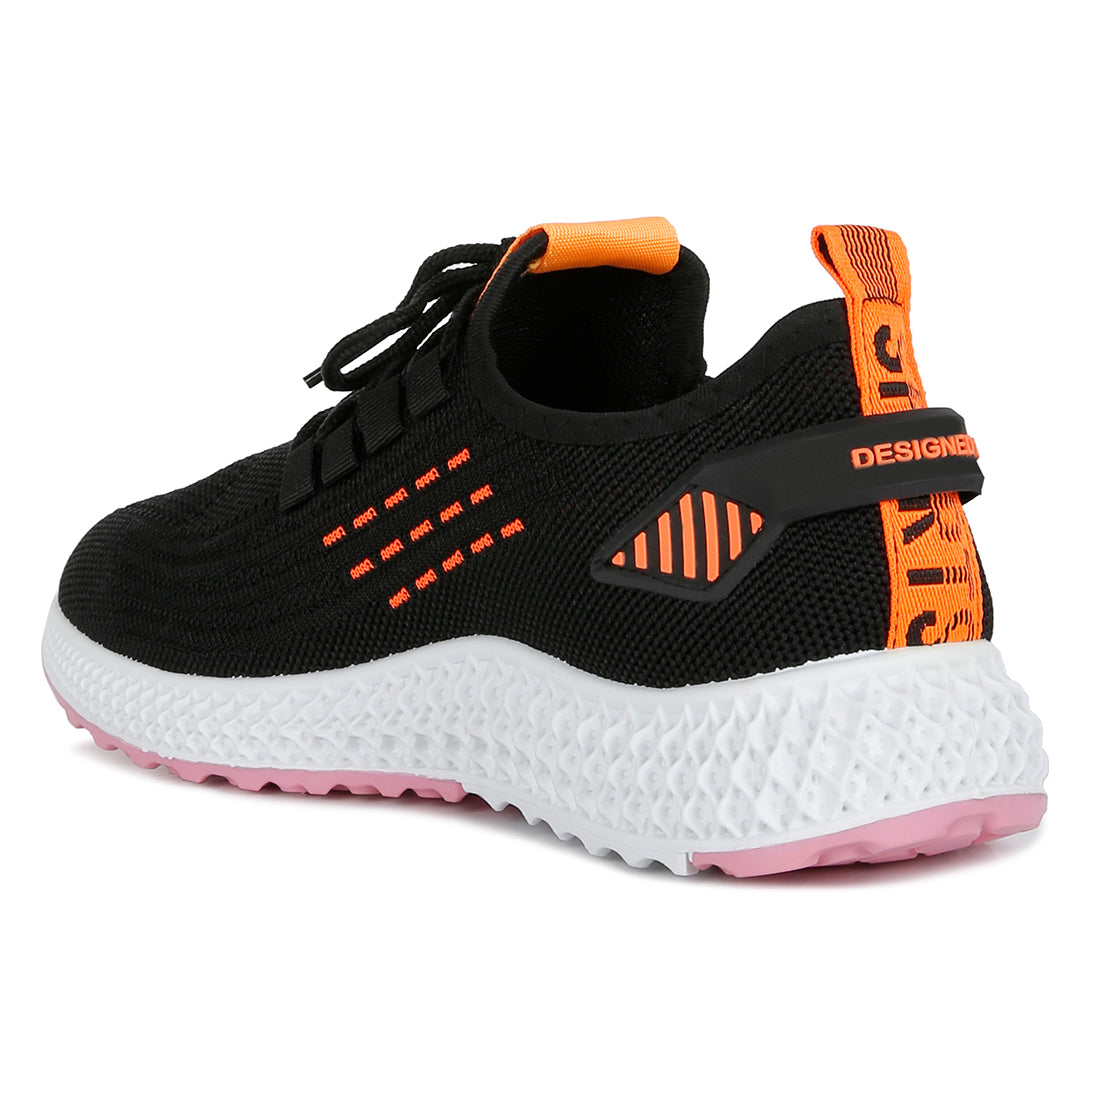 Jump High Active Sneakers in Black